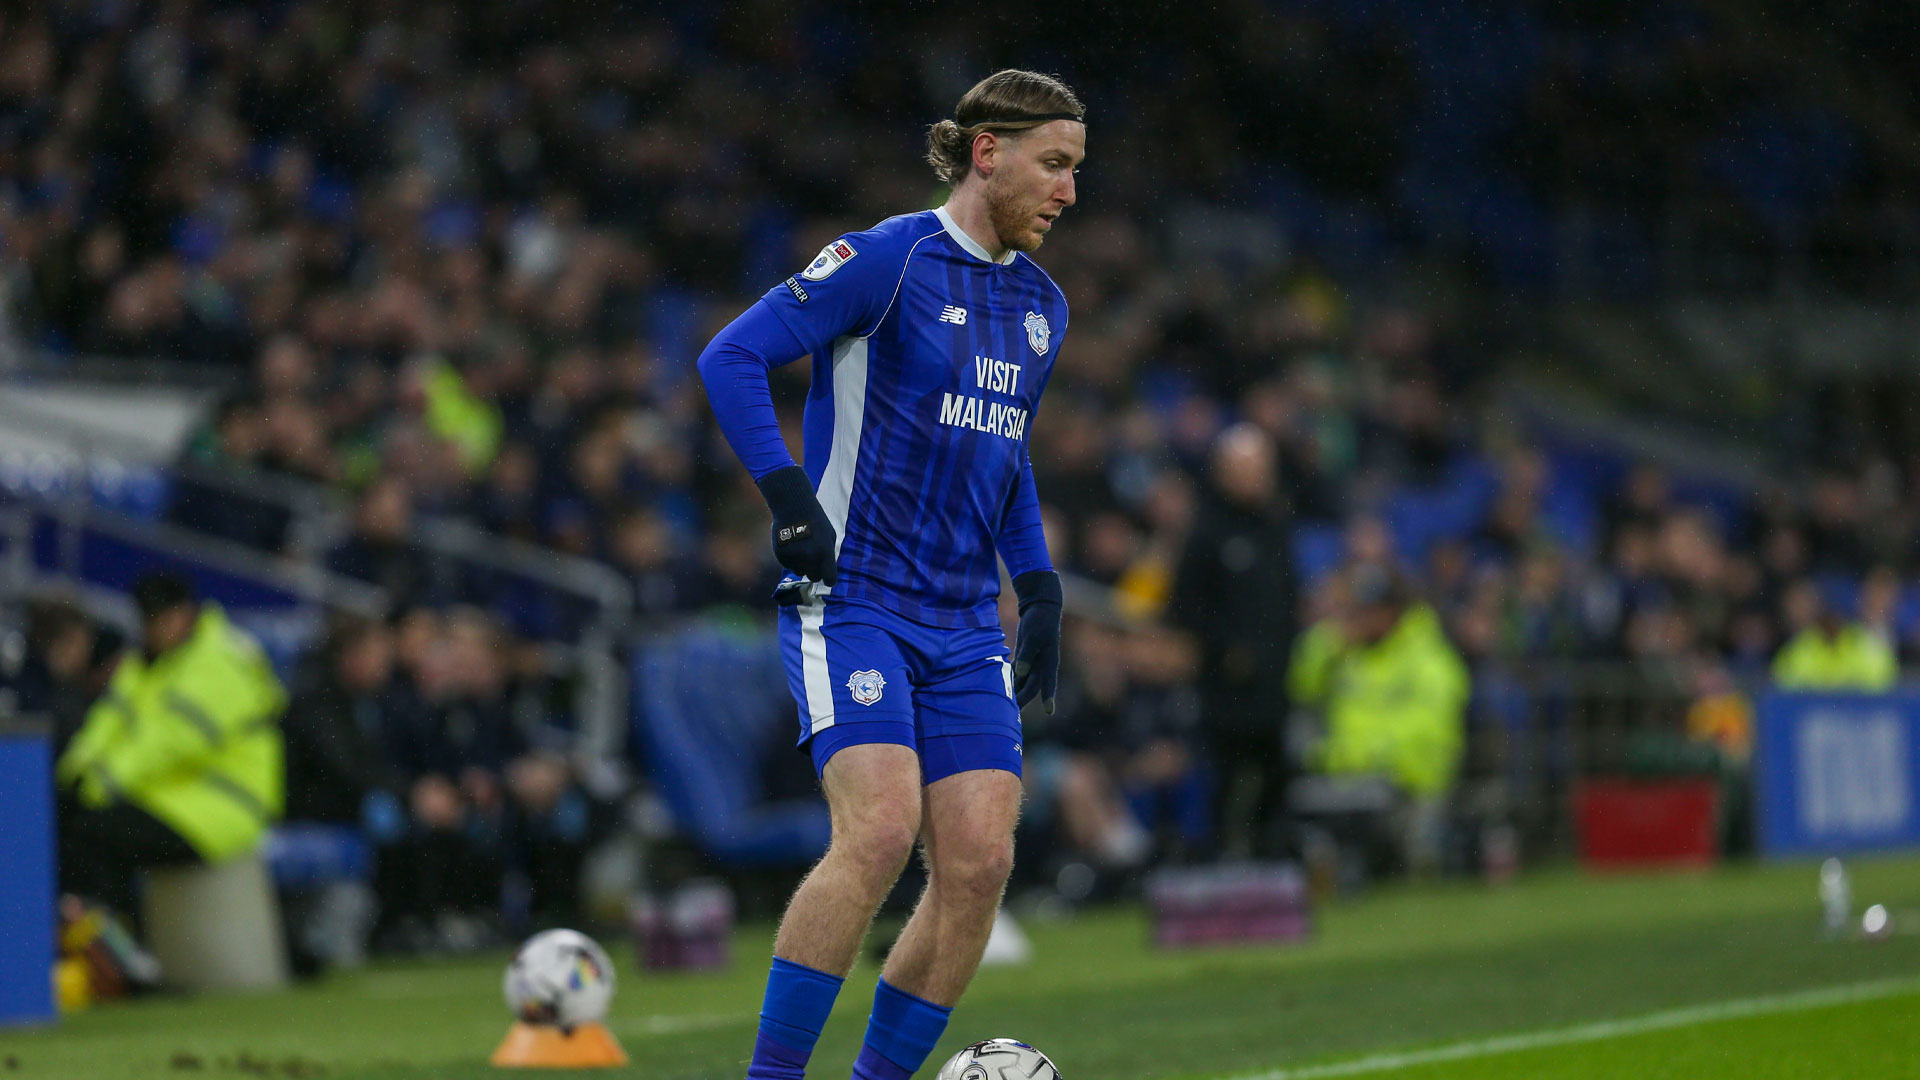 Josh Bowler in action for Cardiff City